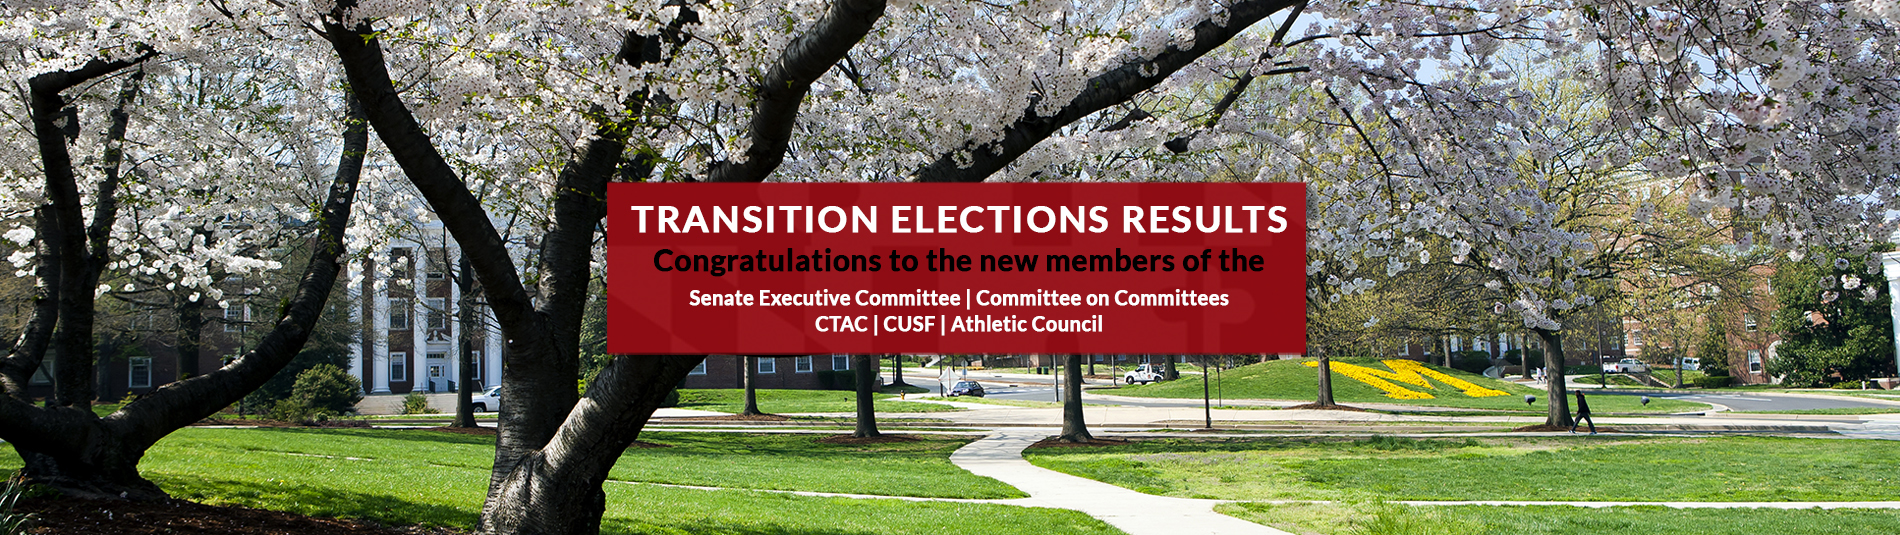 Transition Elections Results